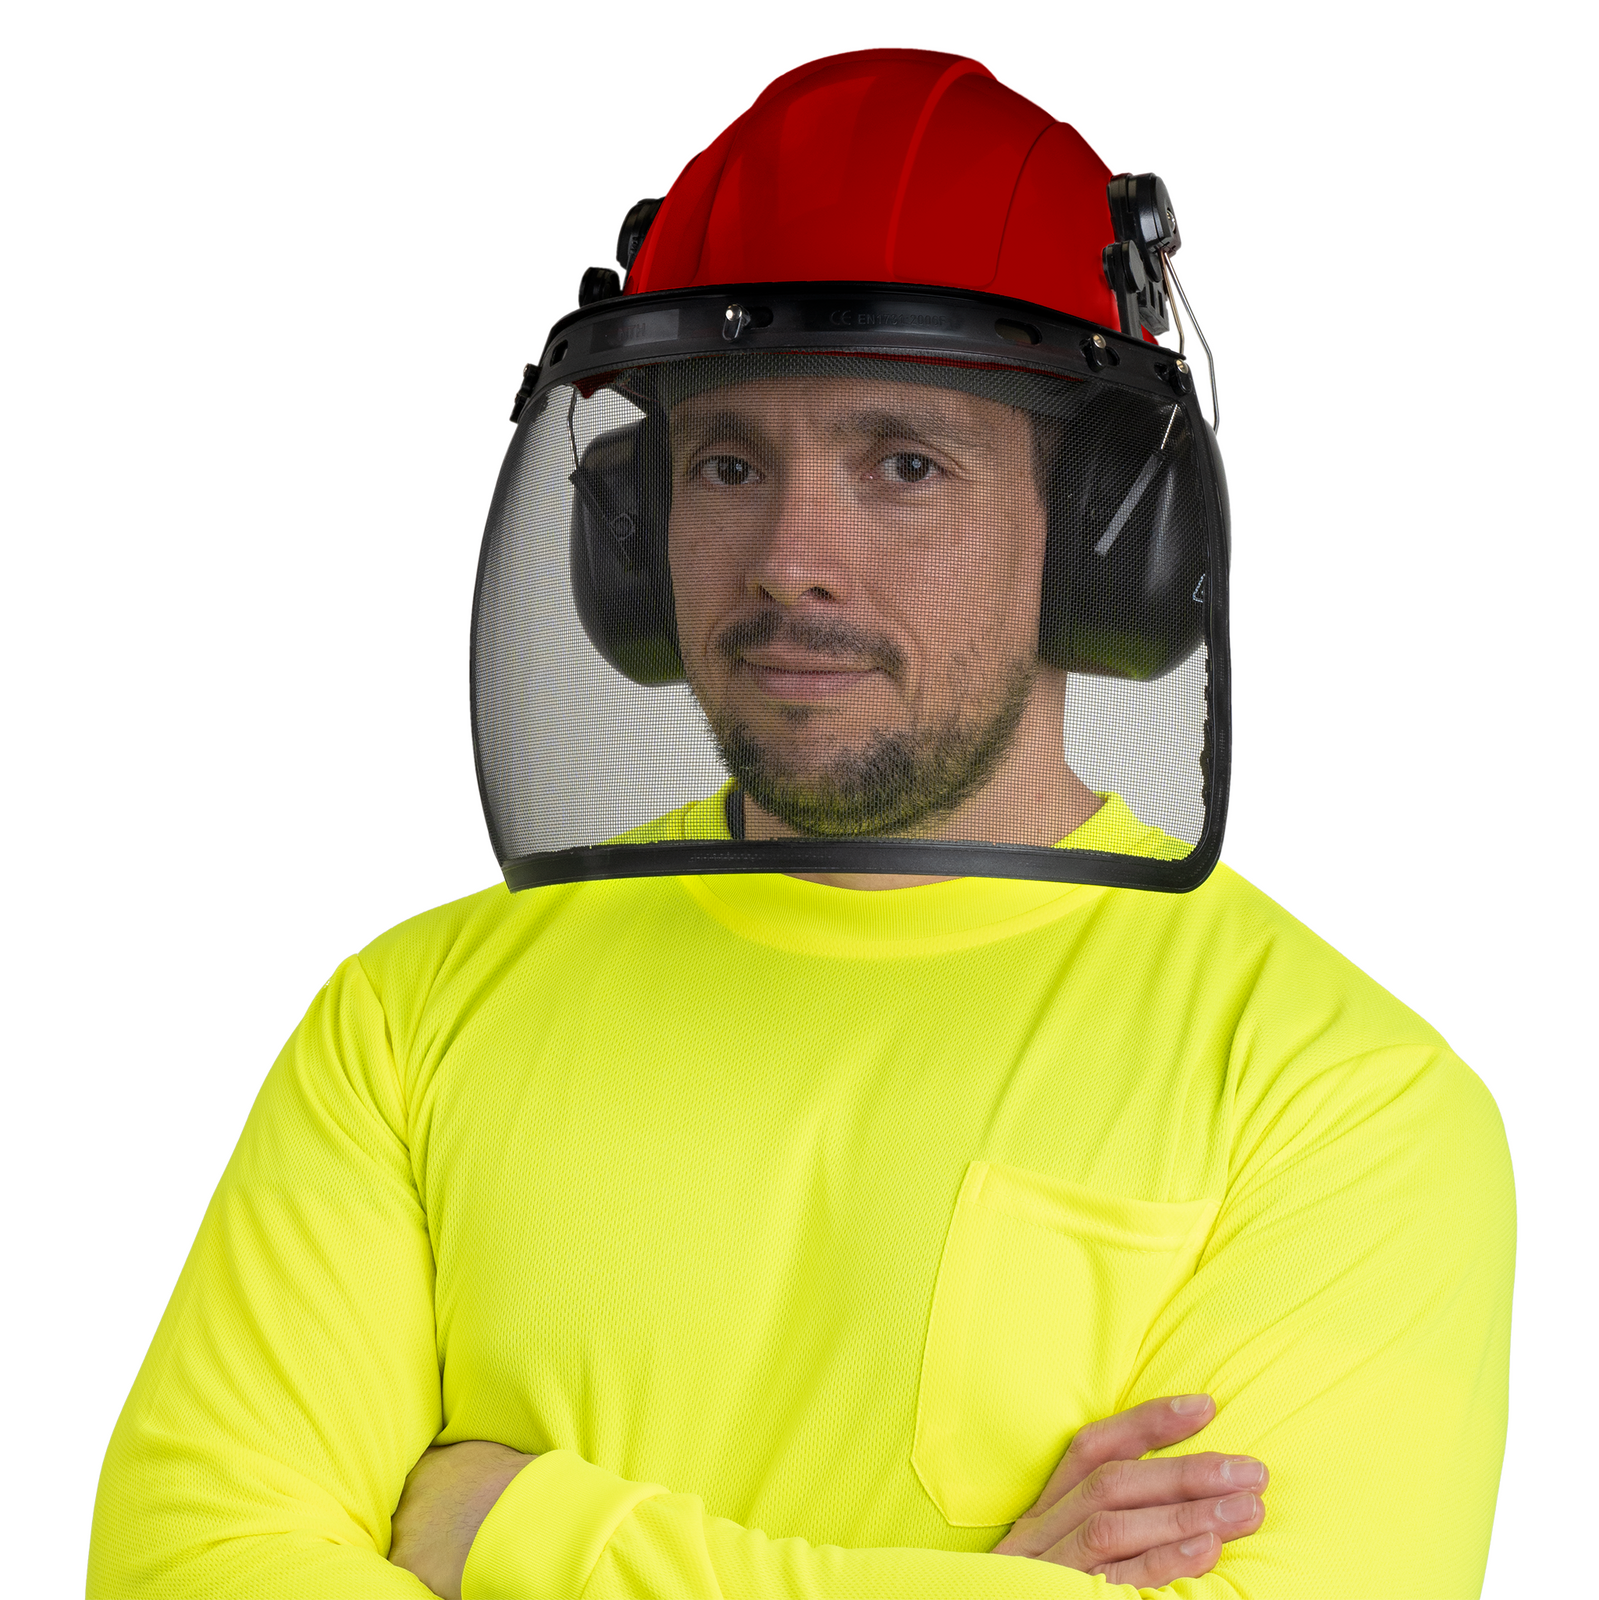 Man wearing a red cap style hard hat safety kit with mounted earmuffs and iron mesh face shield